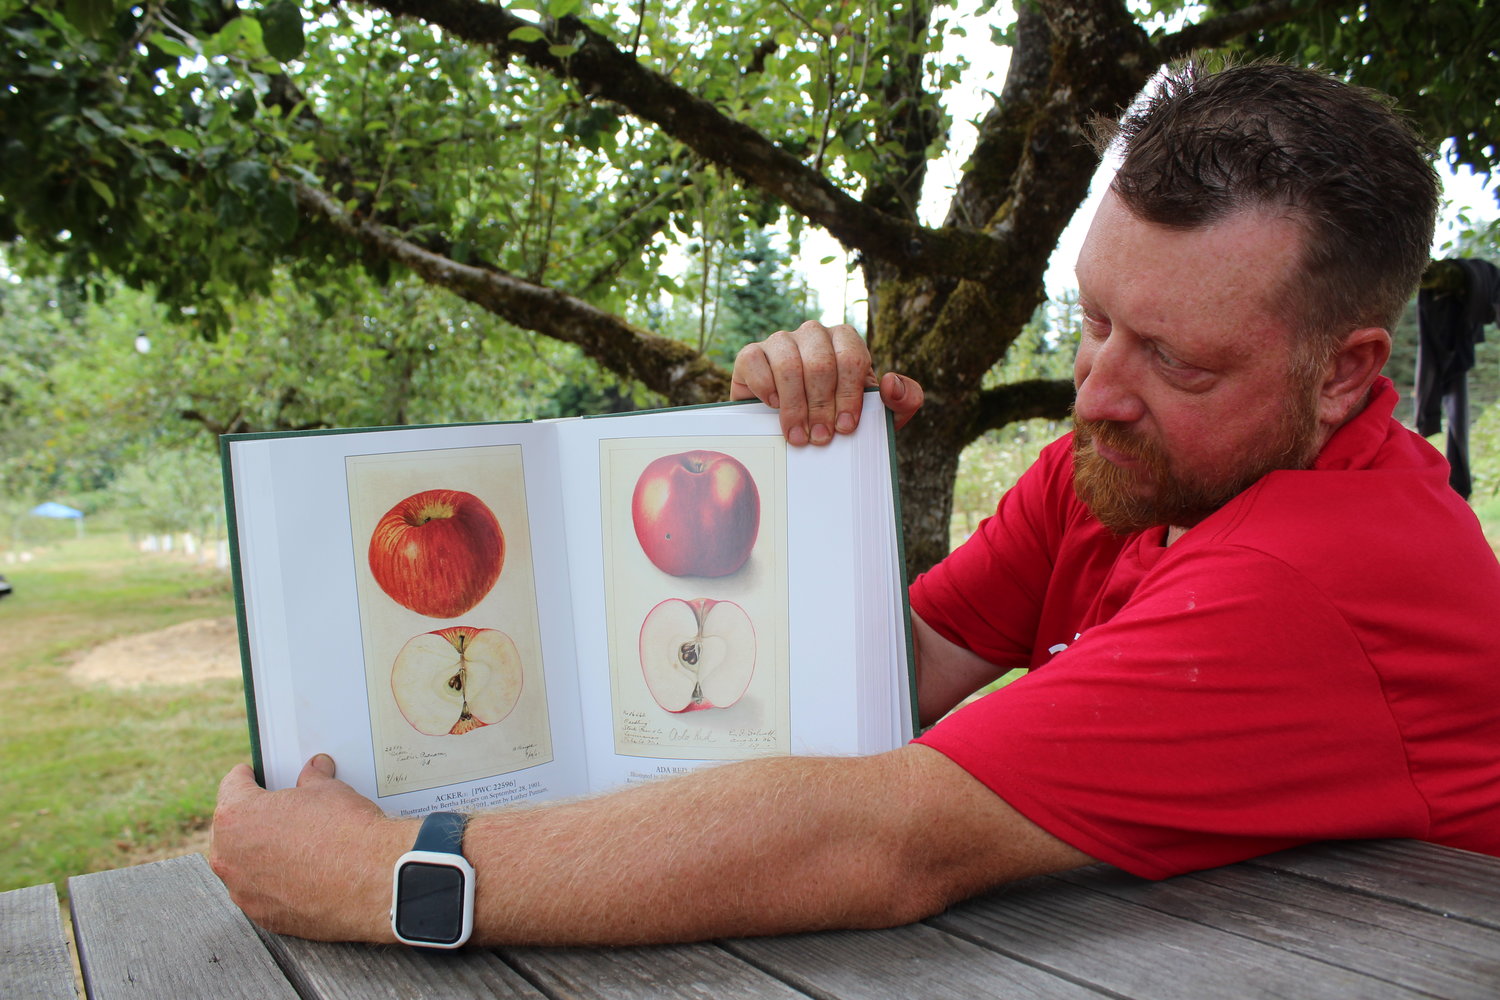 Joshua Hail shows a page from the "Illustrated History of Apples" a comprehensive guide to antique apple varieties, from which some of Hail's "lost" apple tree varieties have been identified.